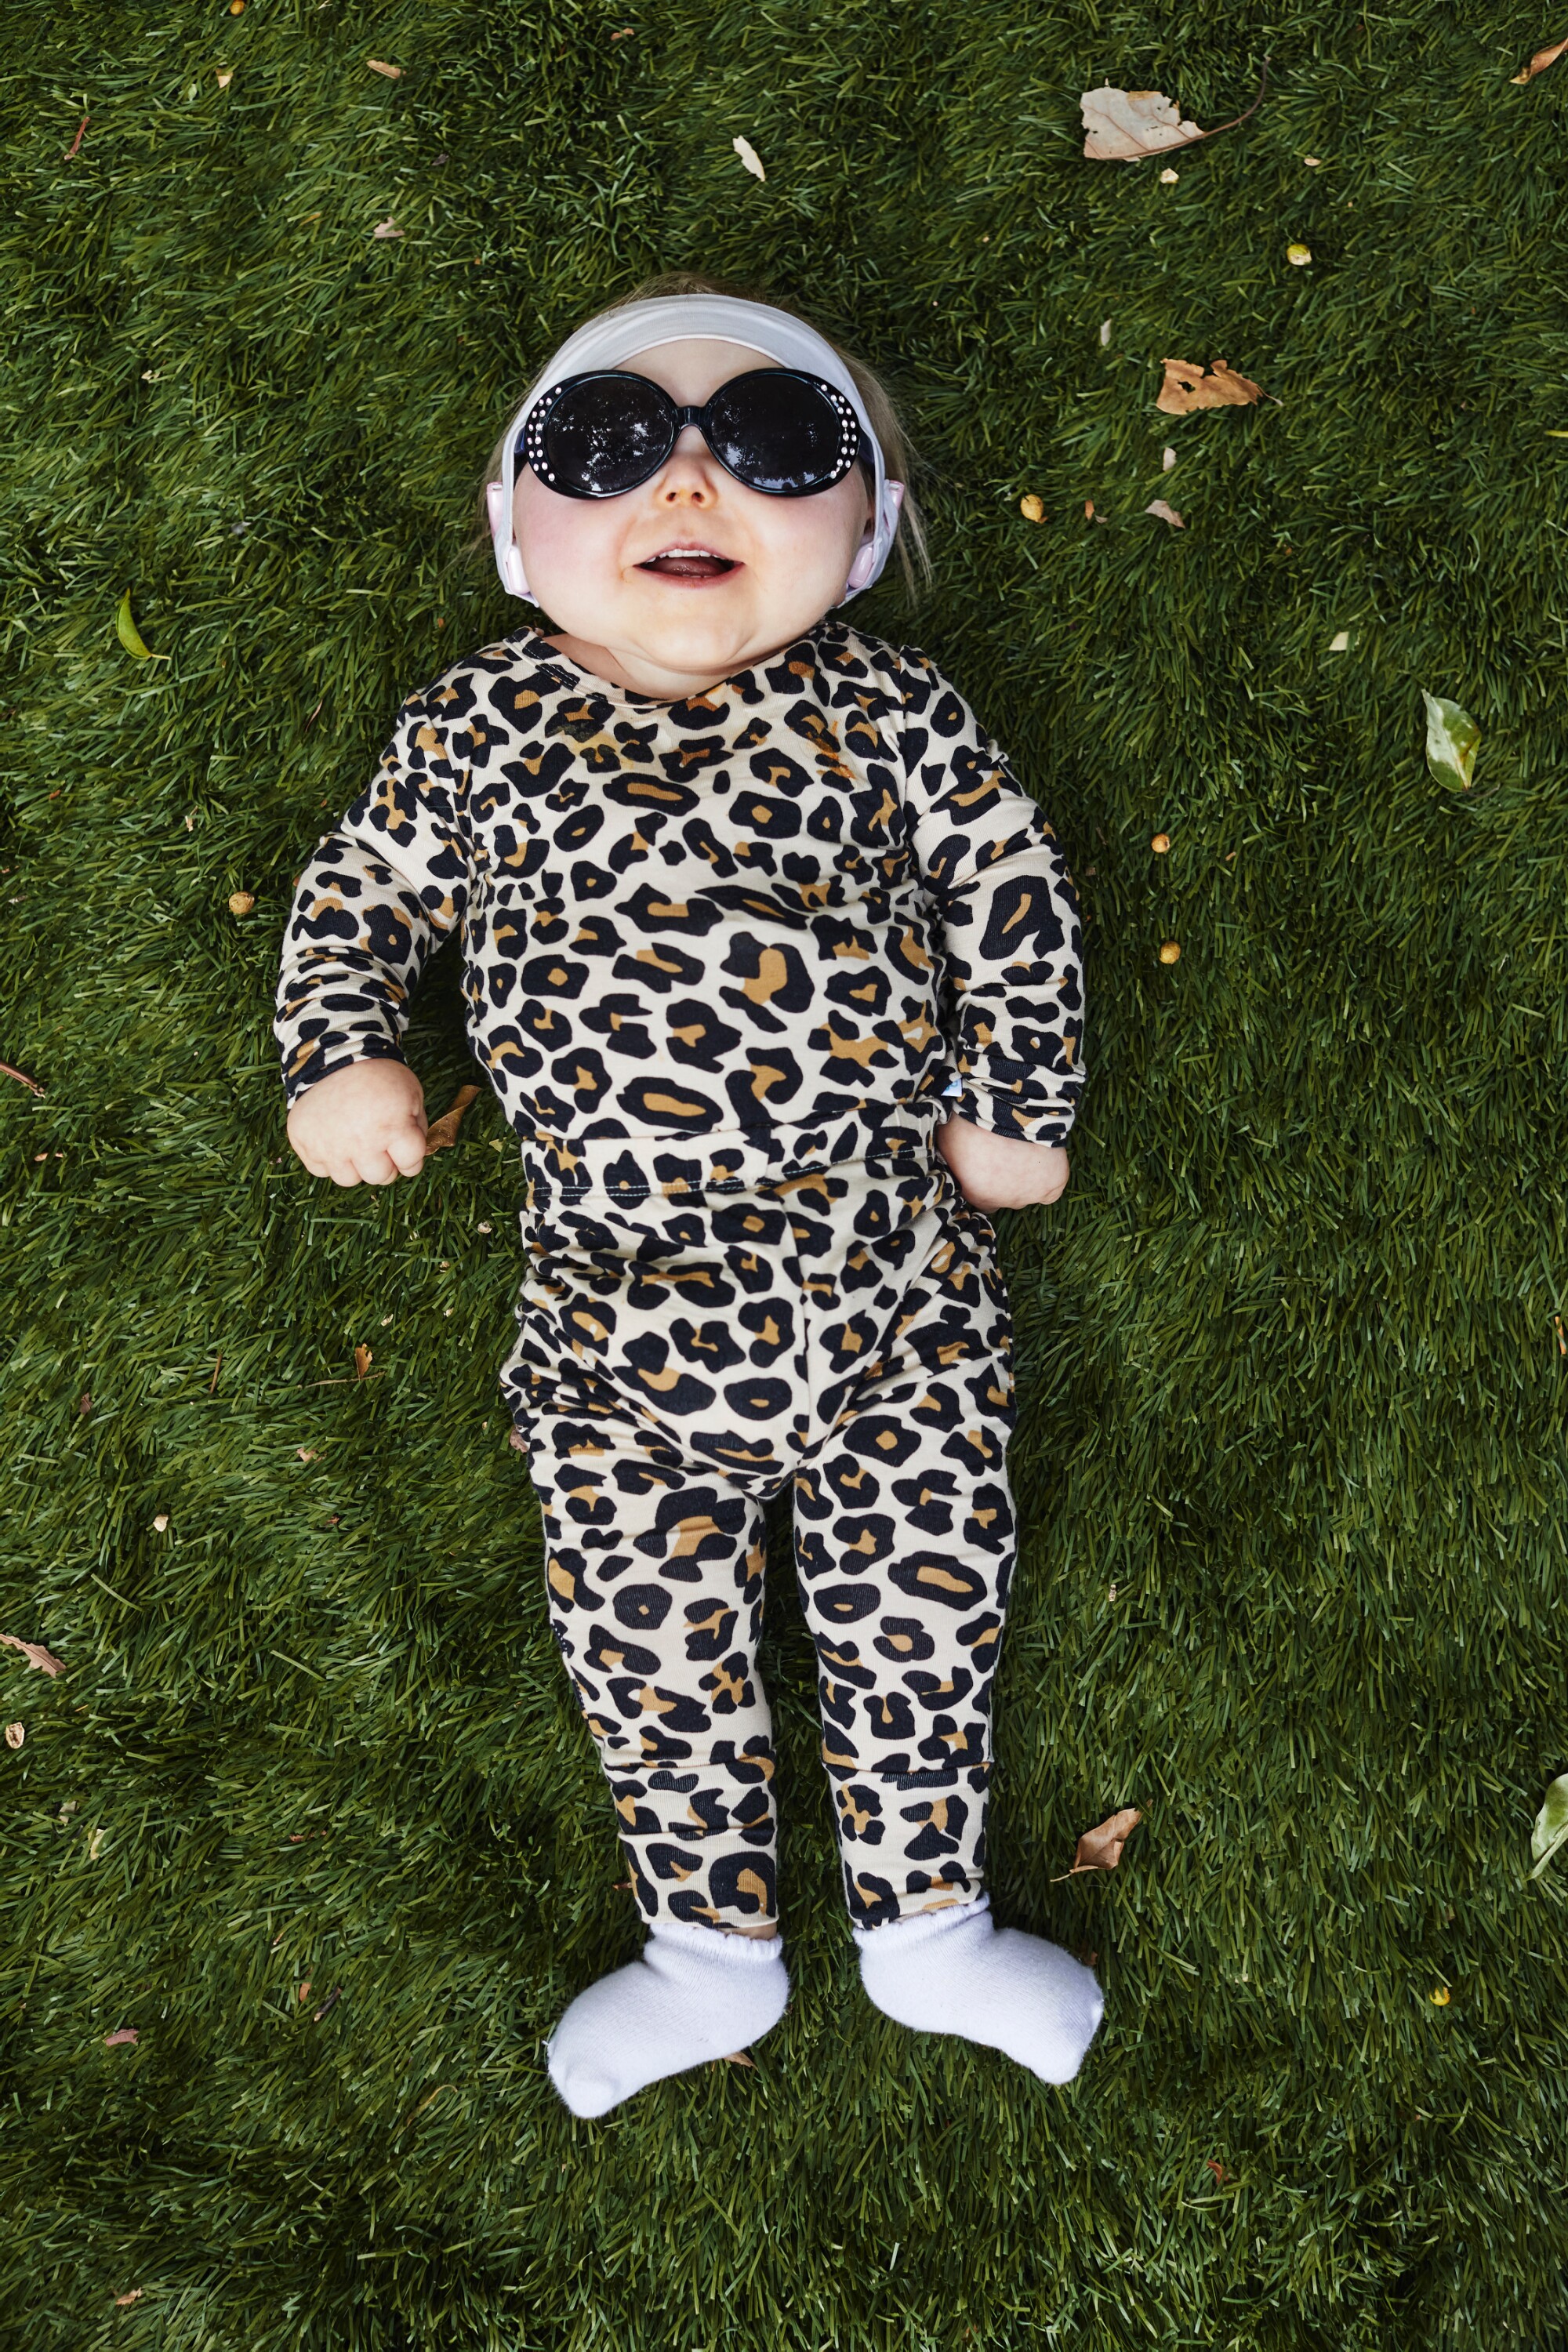 A baby wearing sunglasses on a lawn.